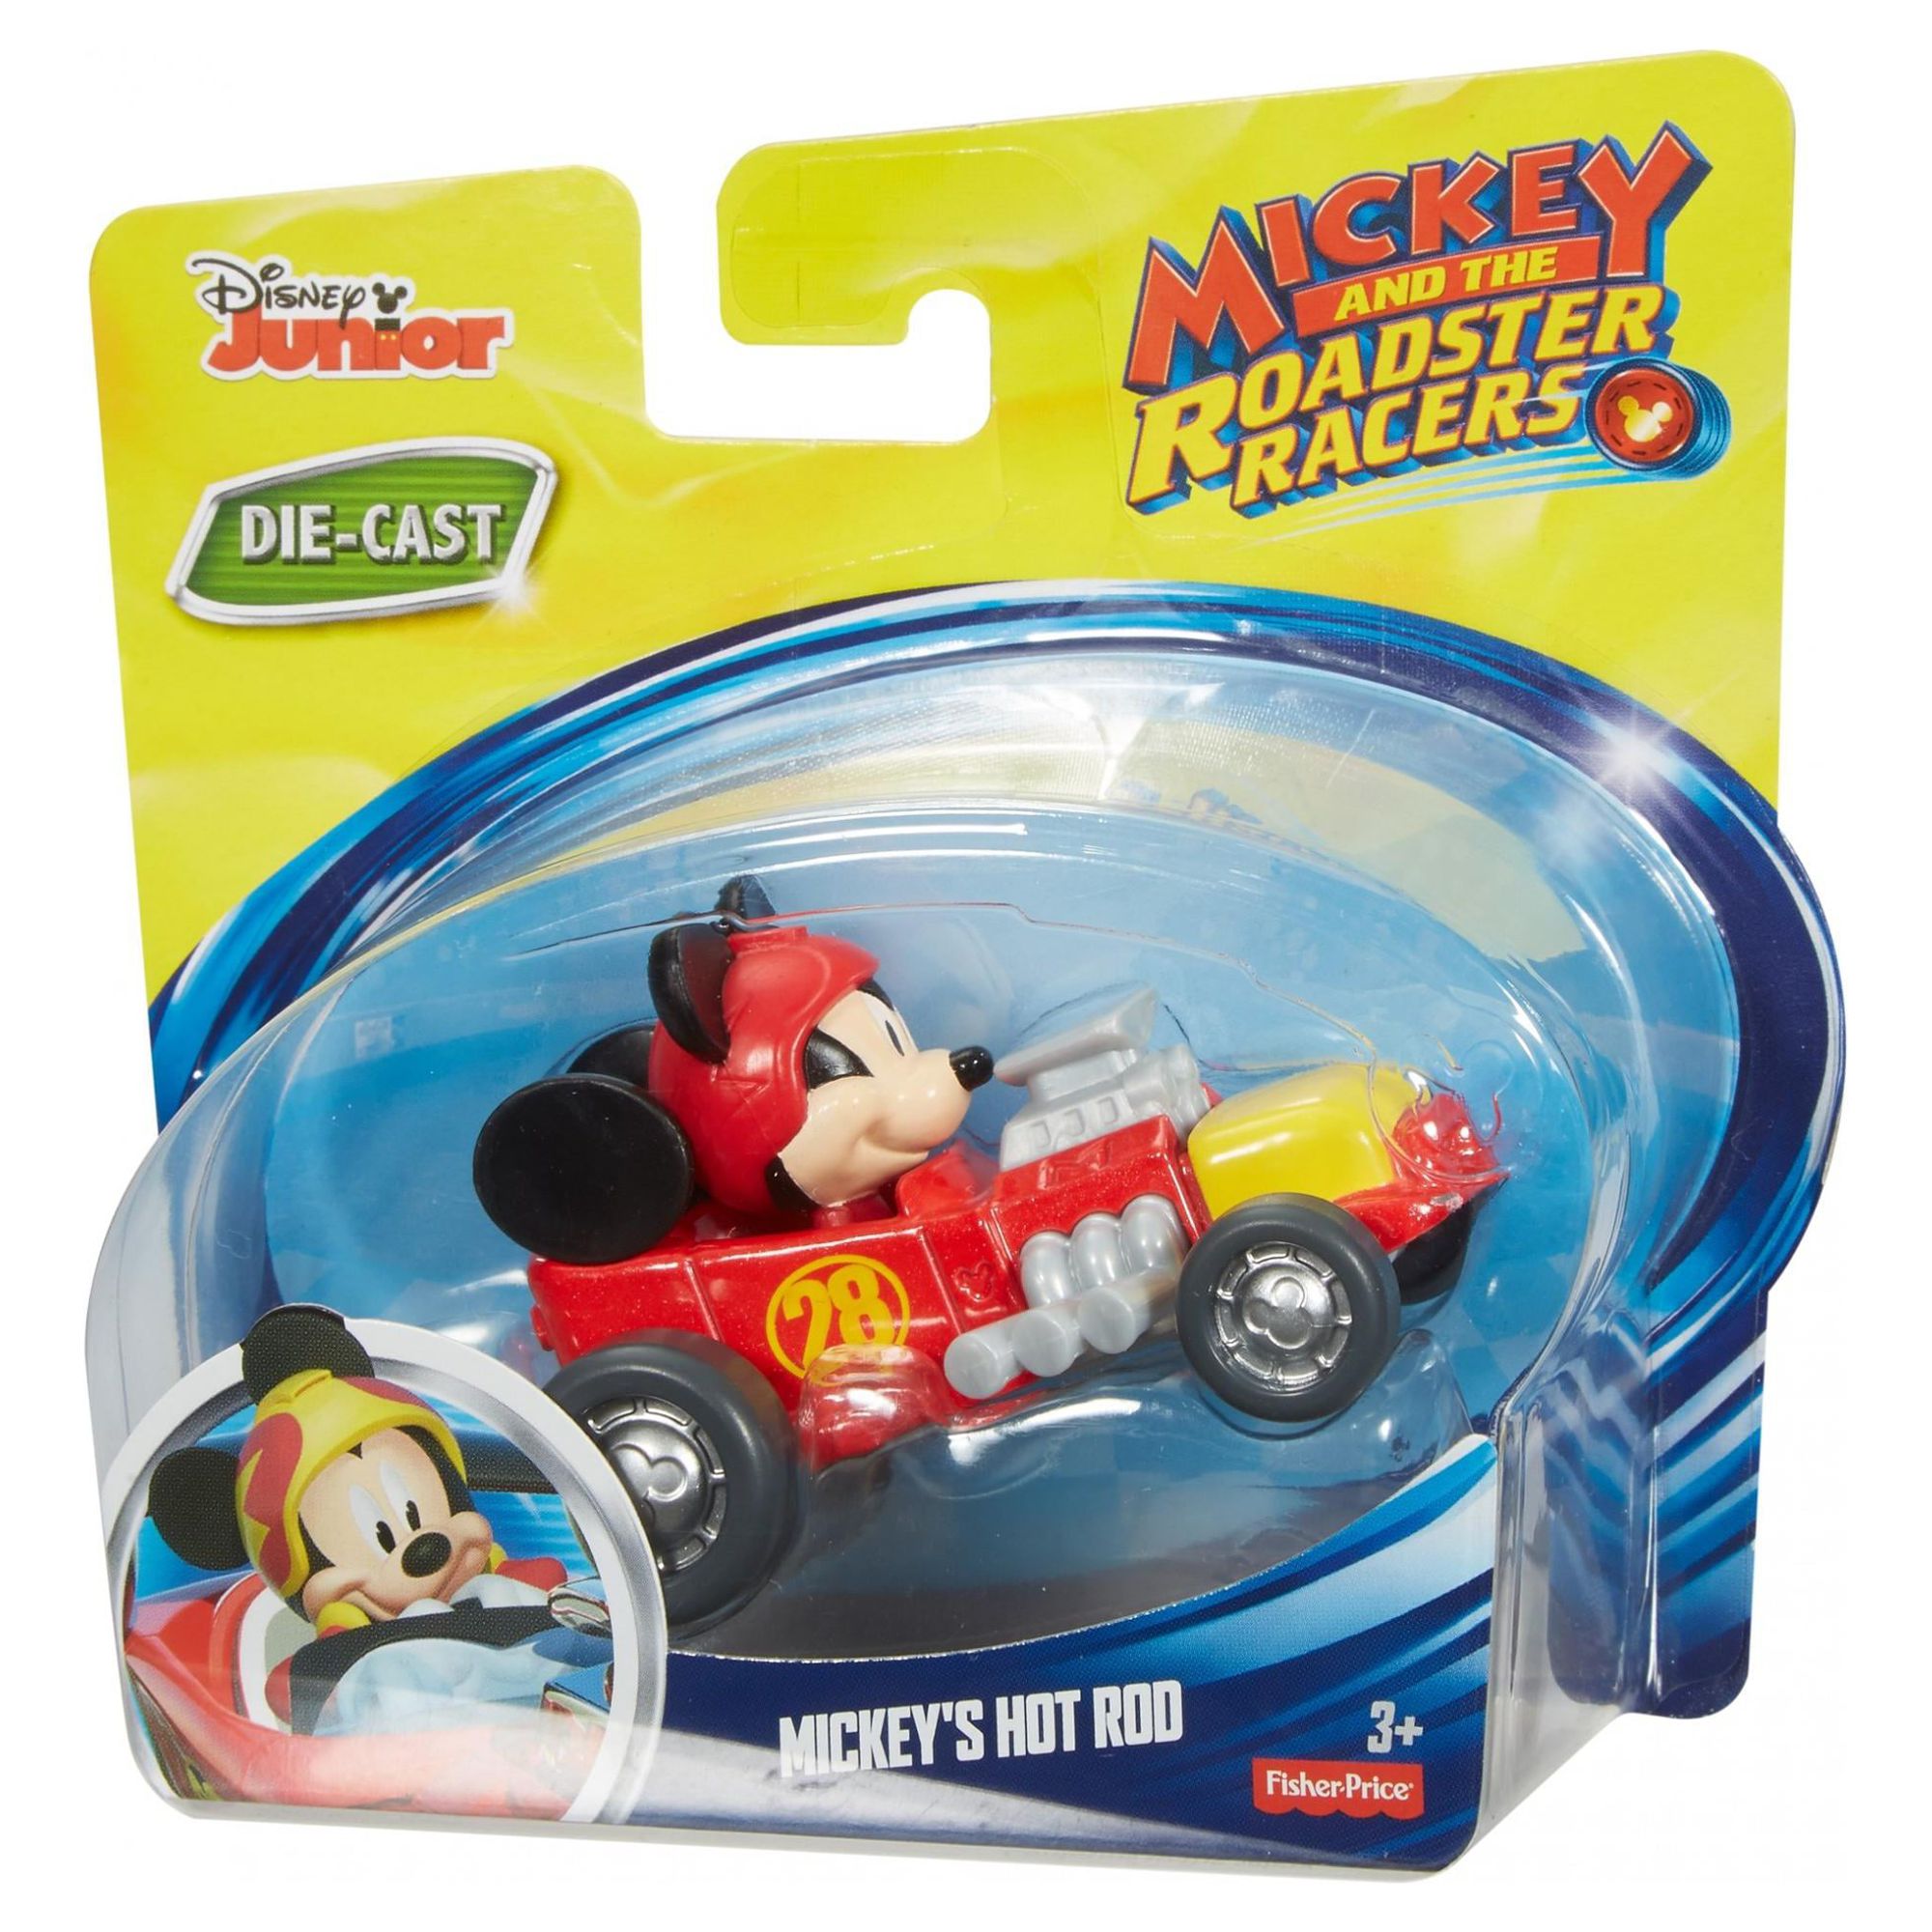 Disney Mickey and the Roadster Racers Mickey's Hot Rod - image 5 of 6